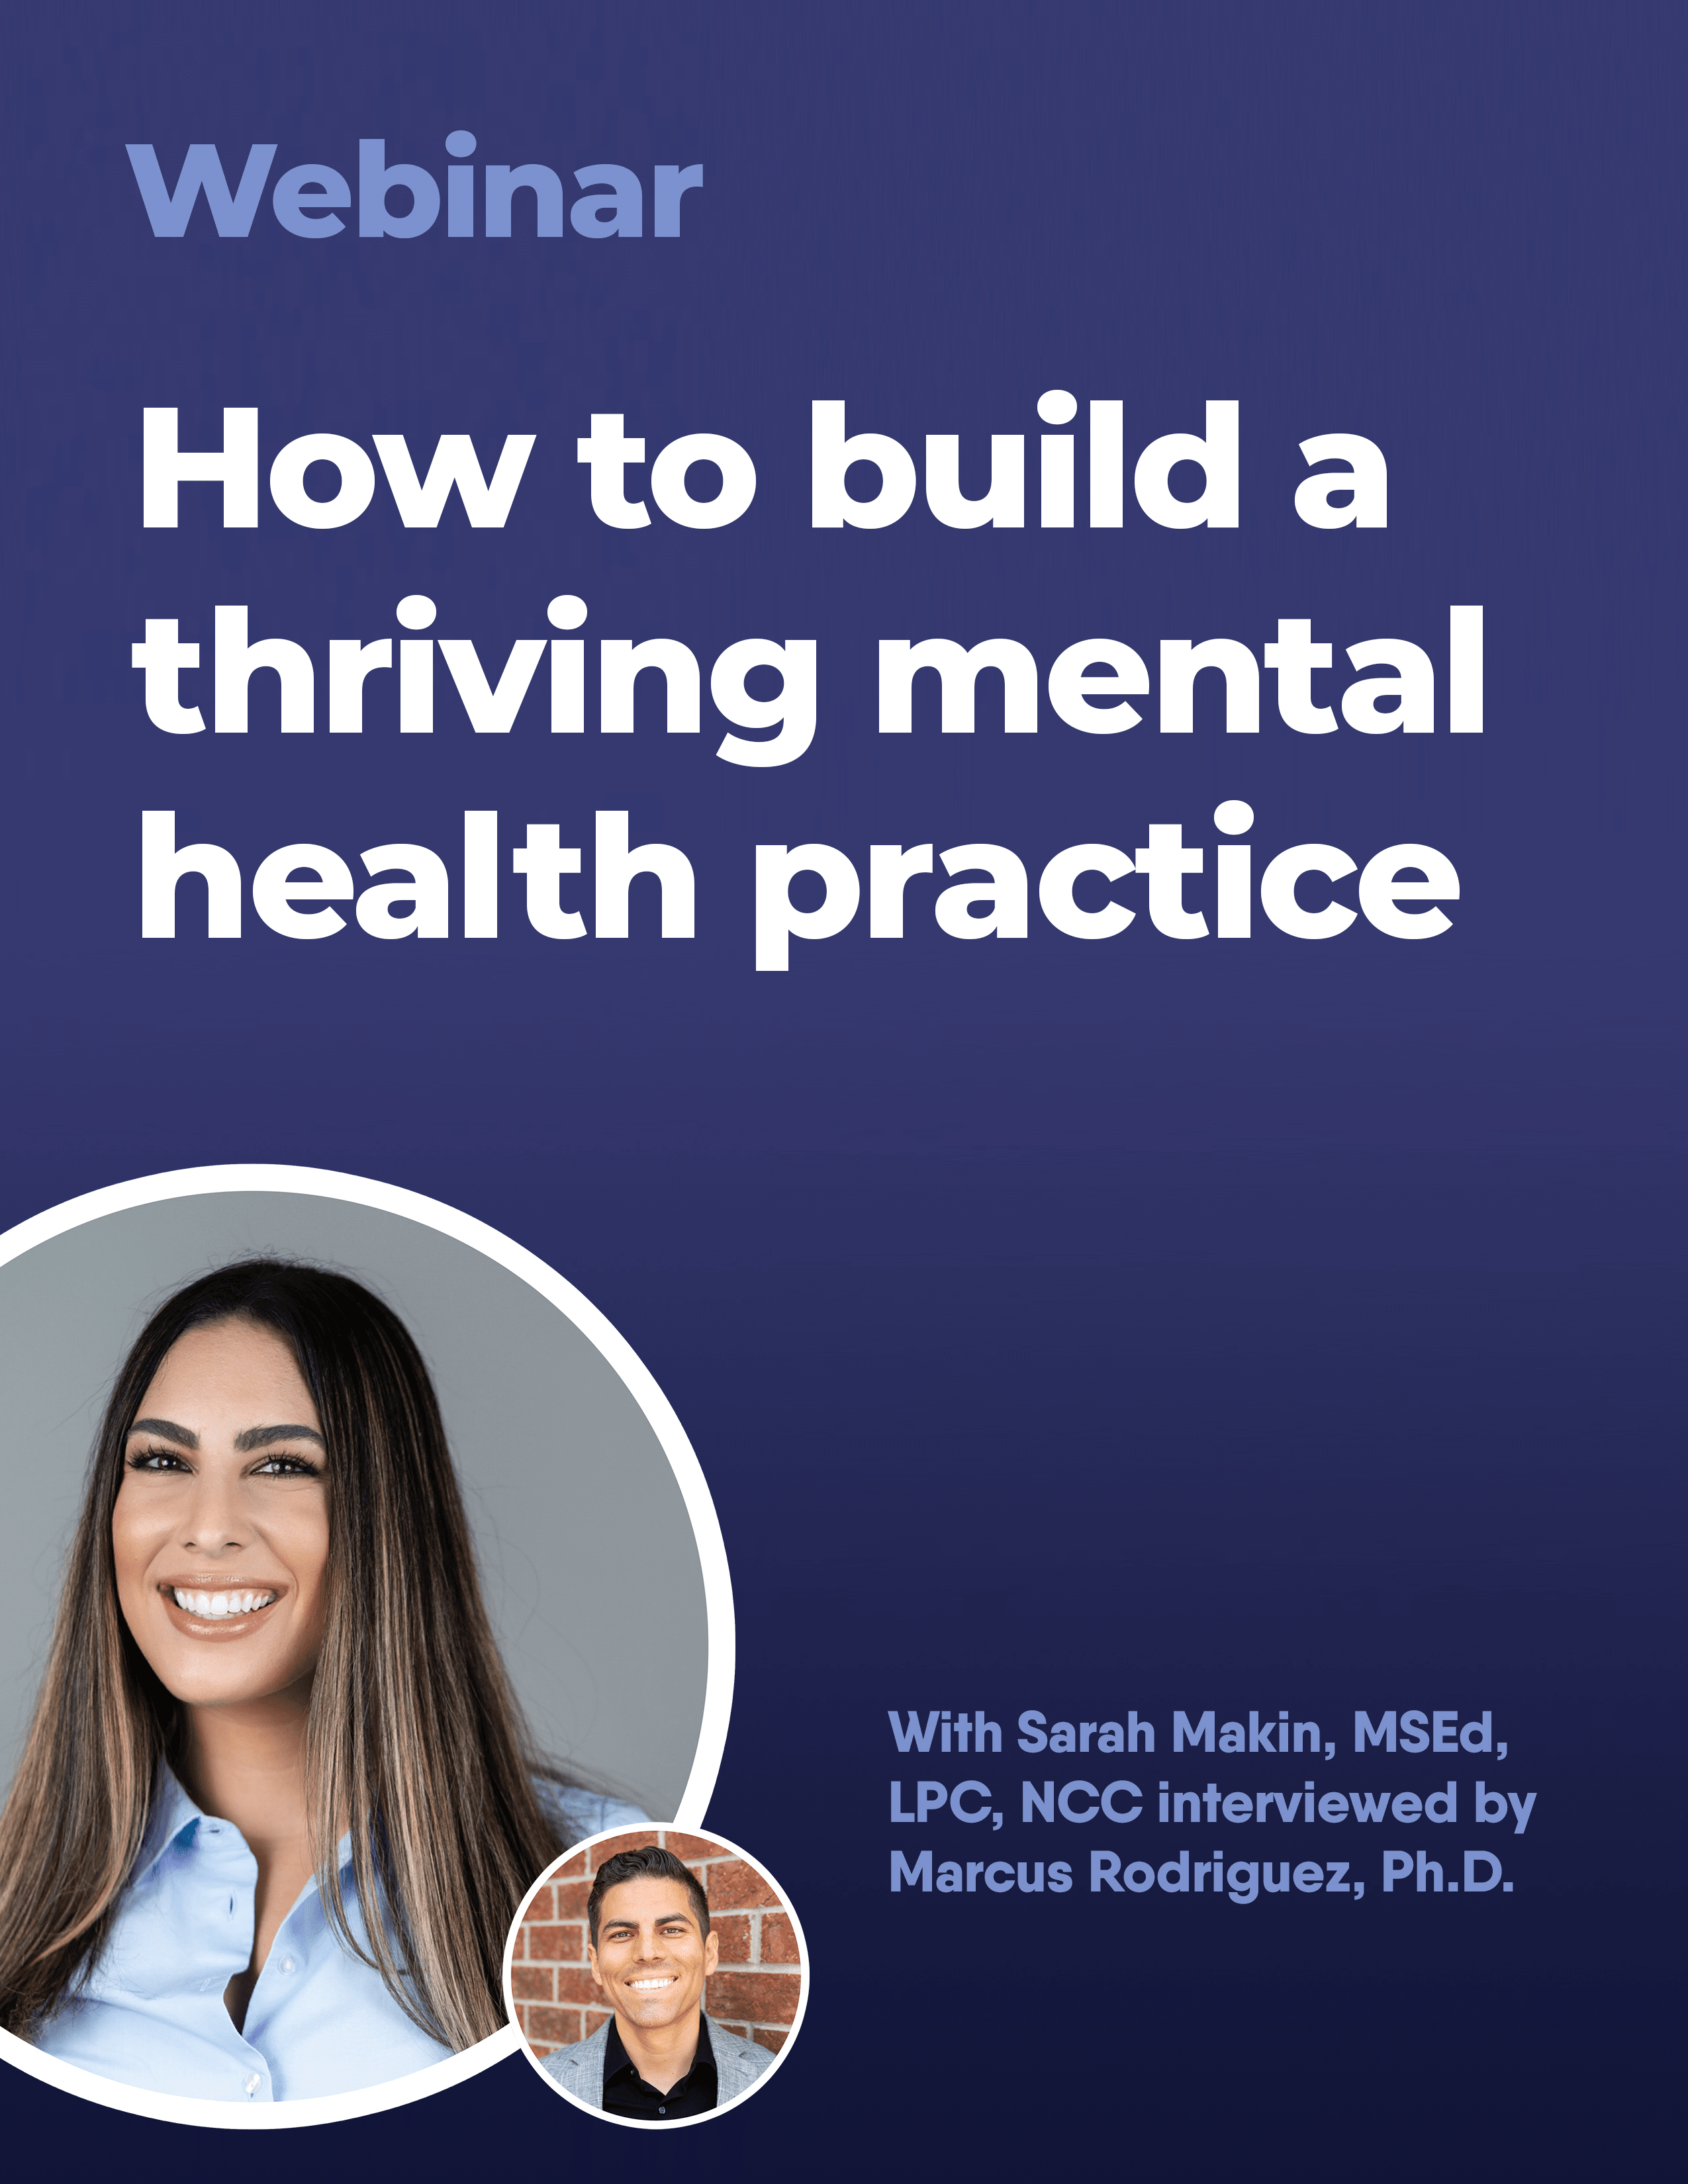 How to build a thriving mental health practice